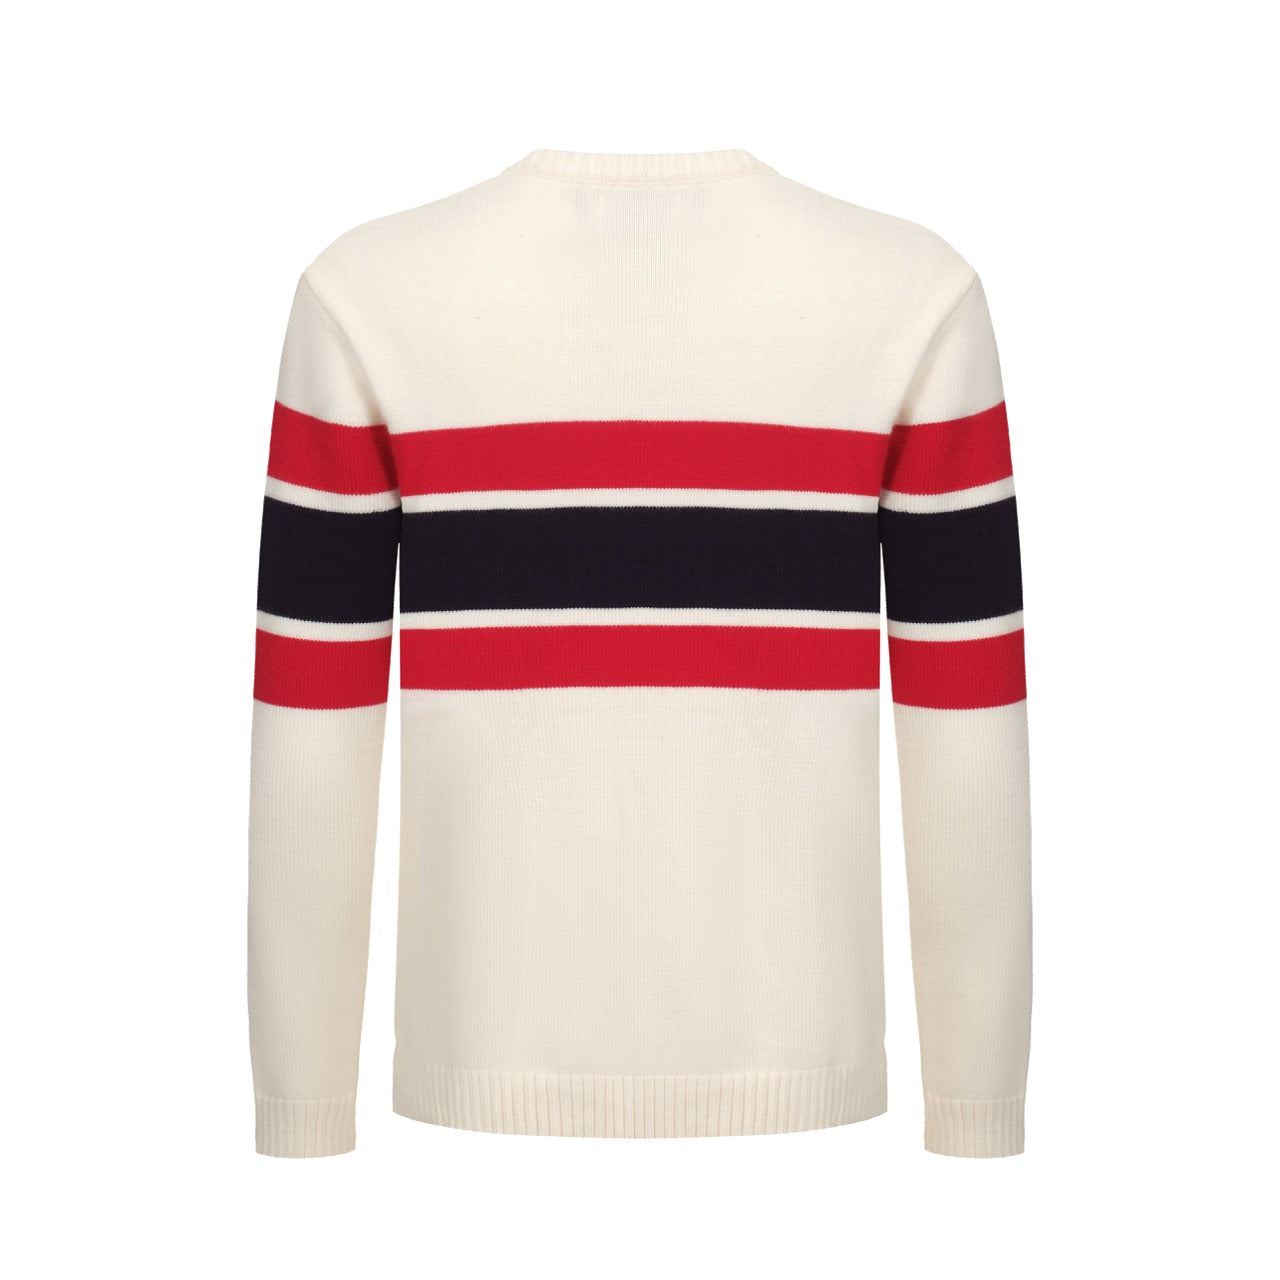 Men's Retro Style White Knitted Long Sleeve Sweater